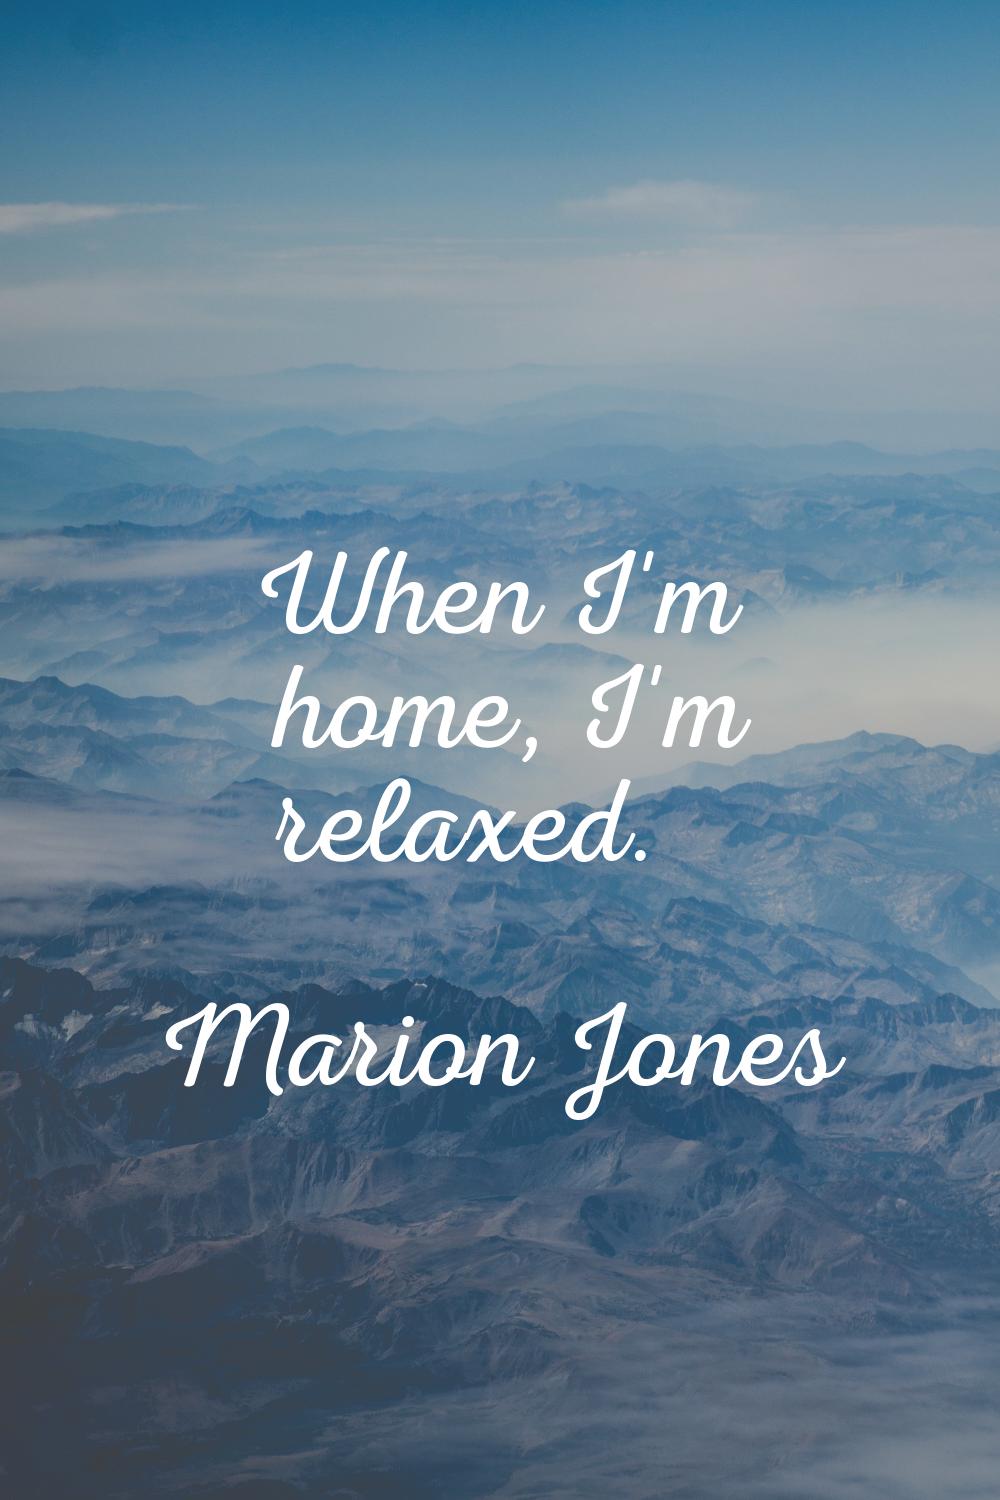 When I'm home, I'm relaxed.